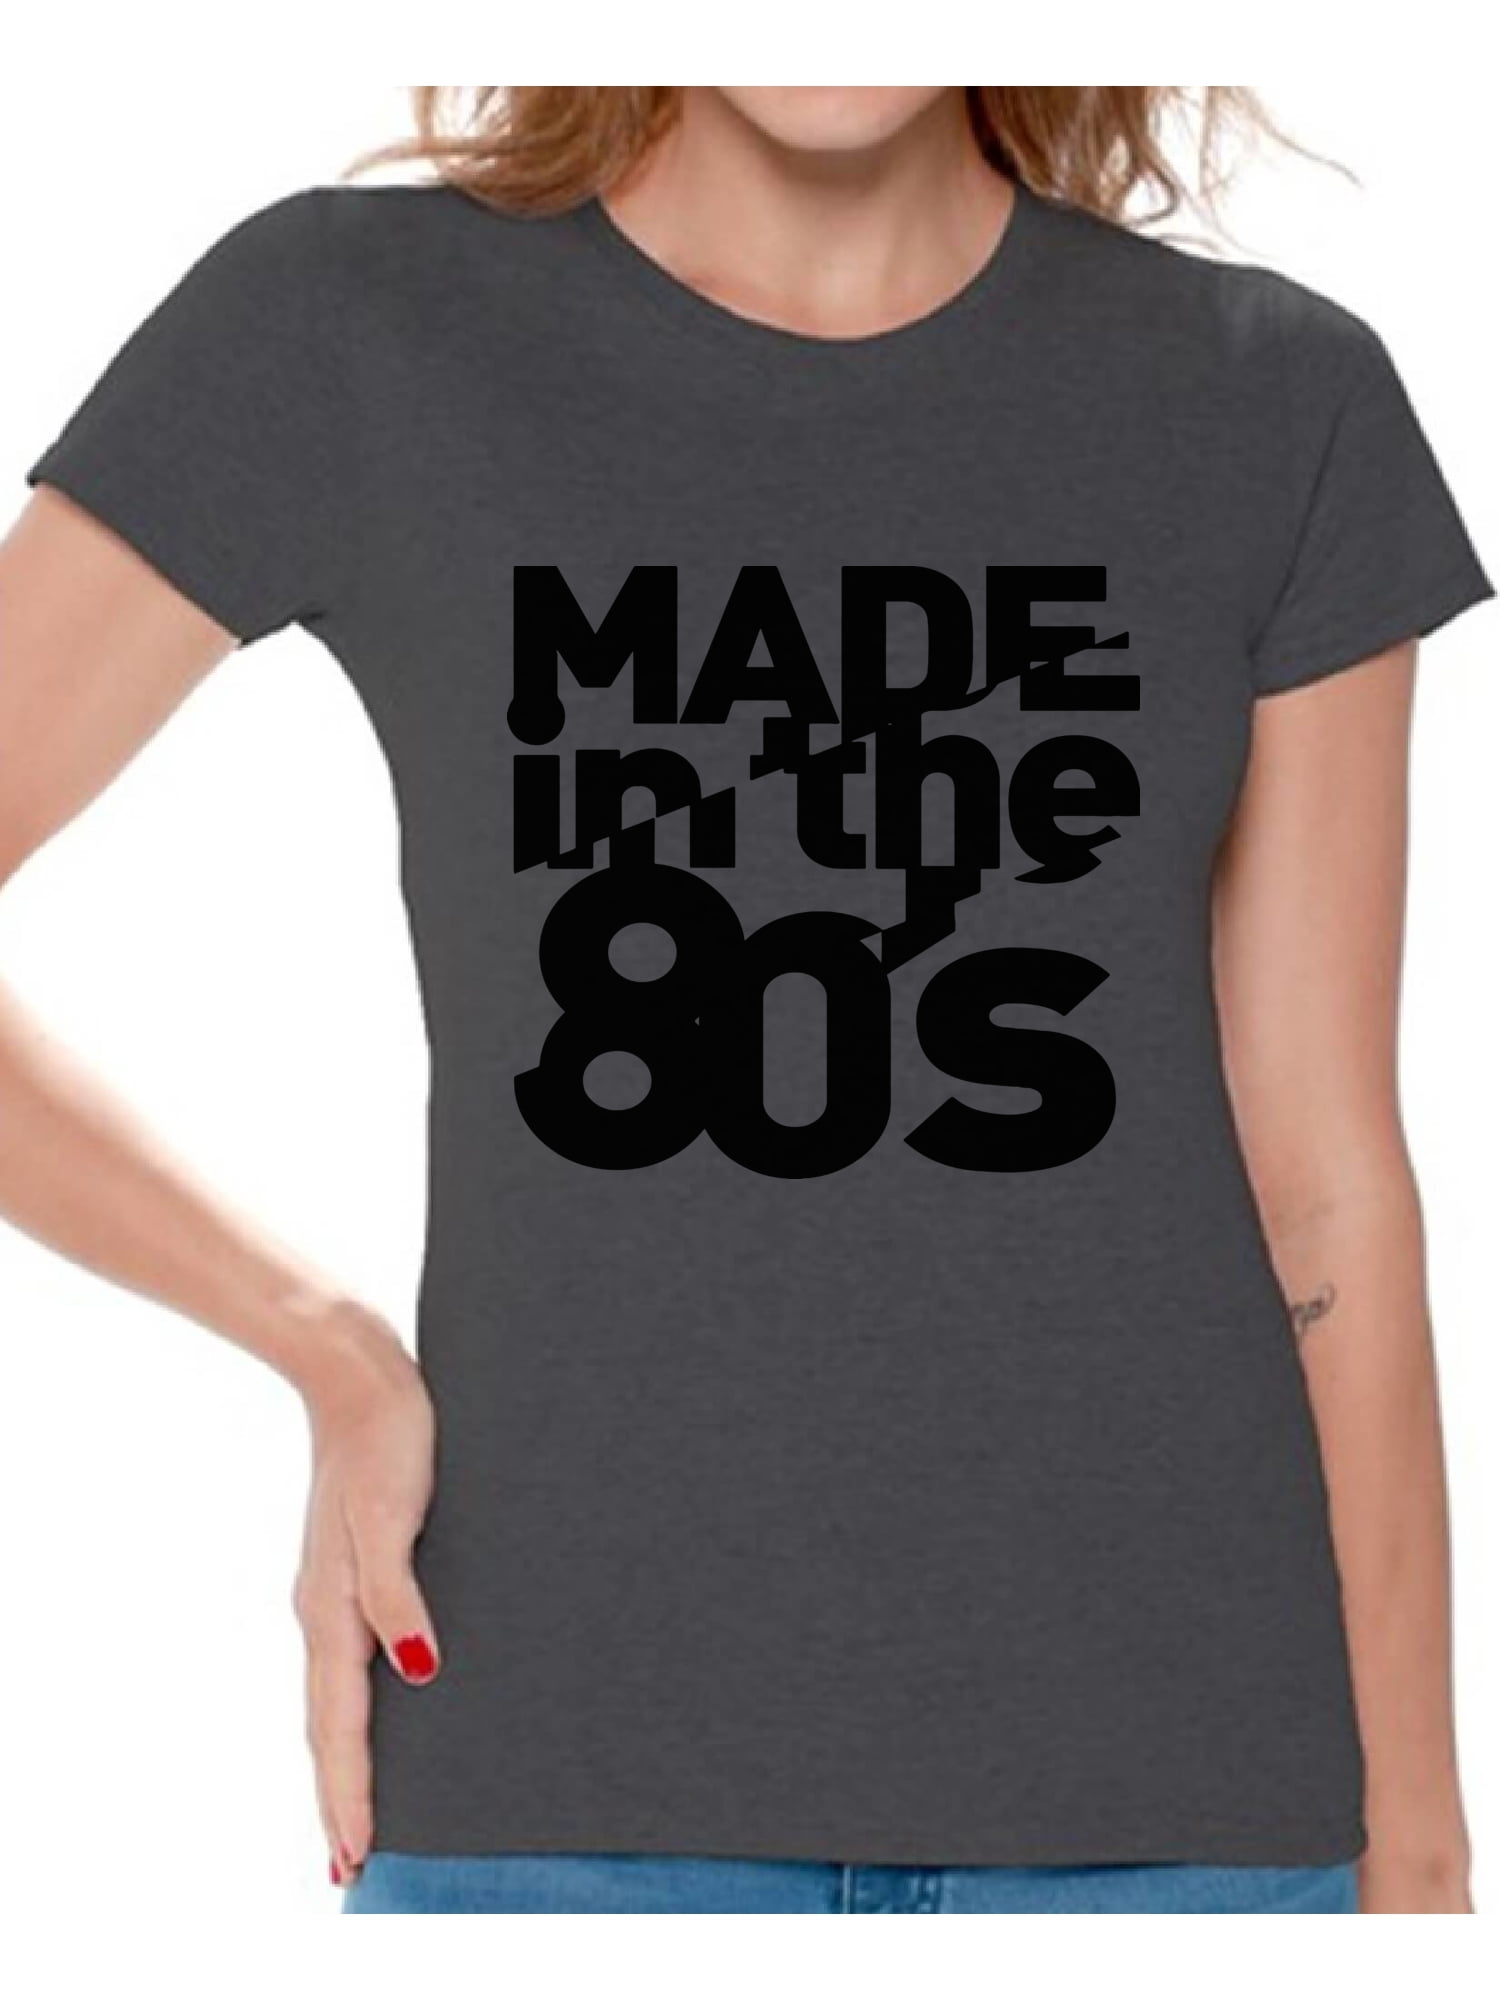 80's Shirt 40th Birthday Shirt Cute Shirt Gift For Her Funny Birthday Shirt Made In The 80's Funky Colors Shirt T-Shirt Birthday Shirt